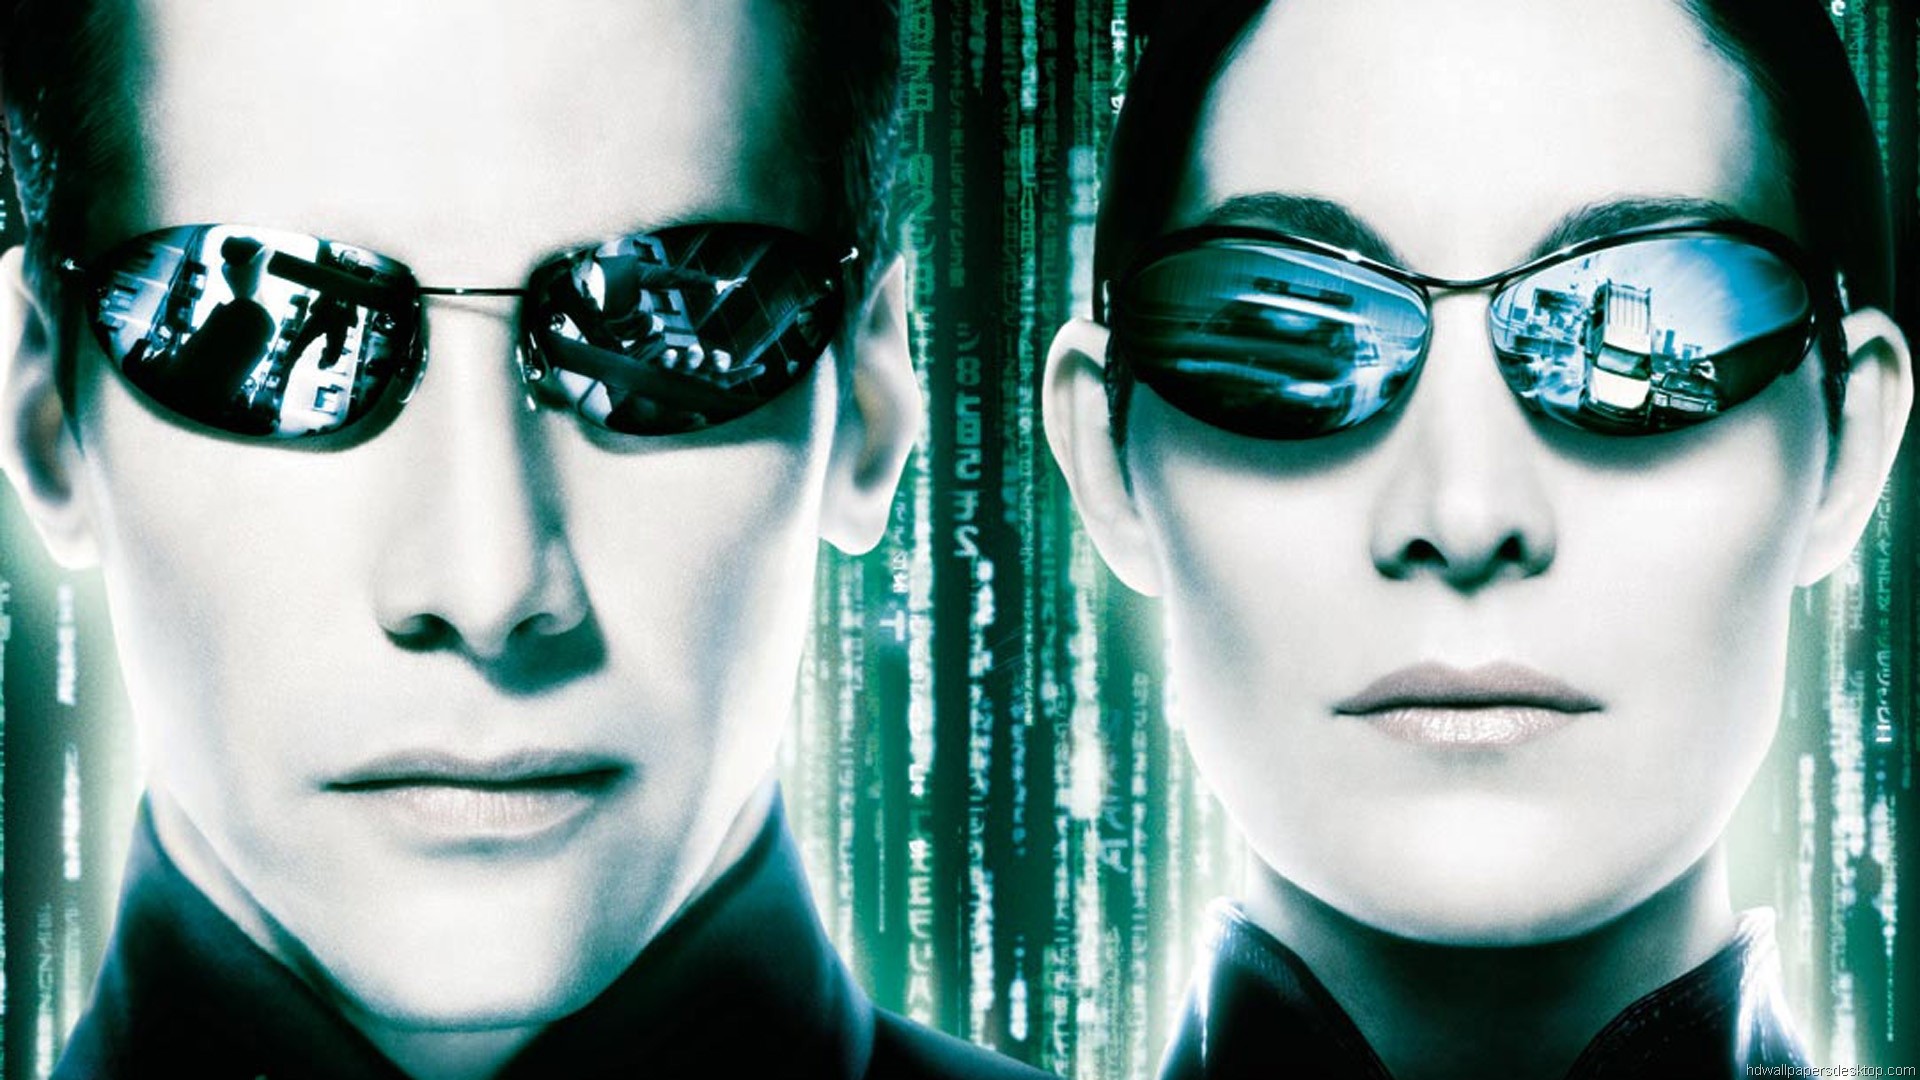 General 1920x1080 The Matrix movies The Matrix Reloaded Neo Keanu Reeves Carrie-Anne Moss Trinity green pale